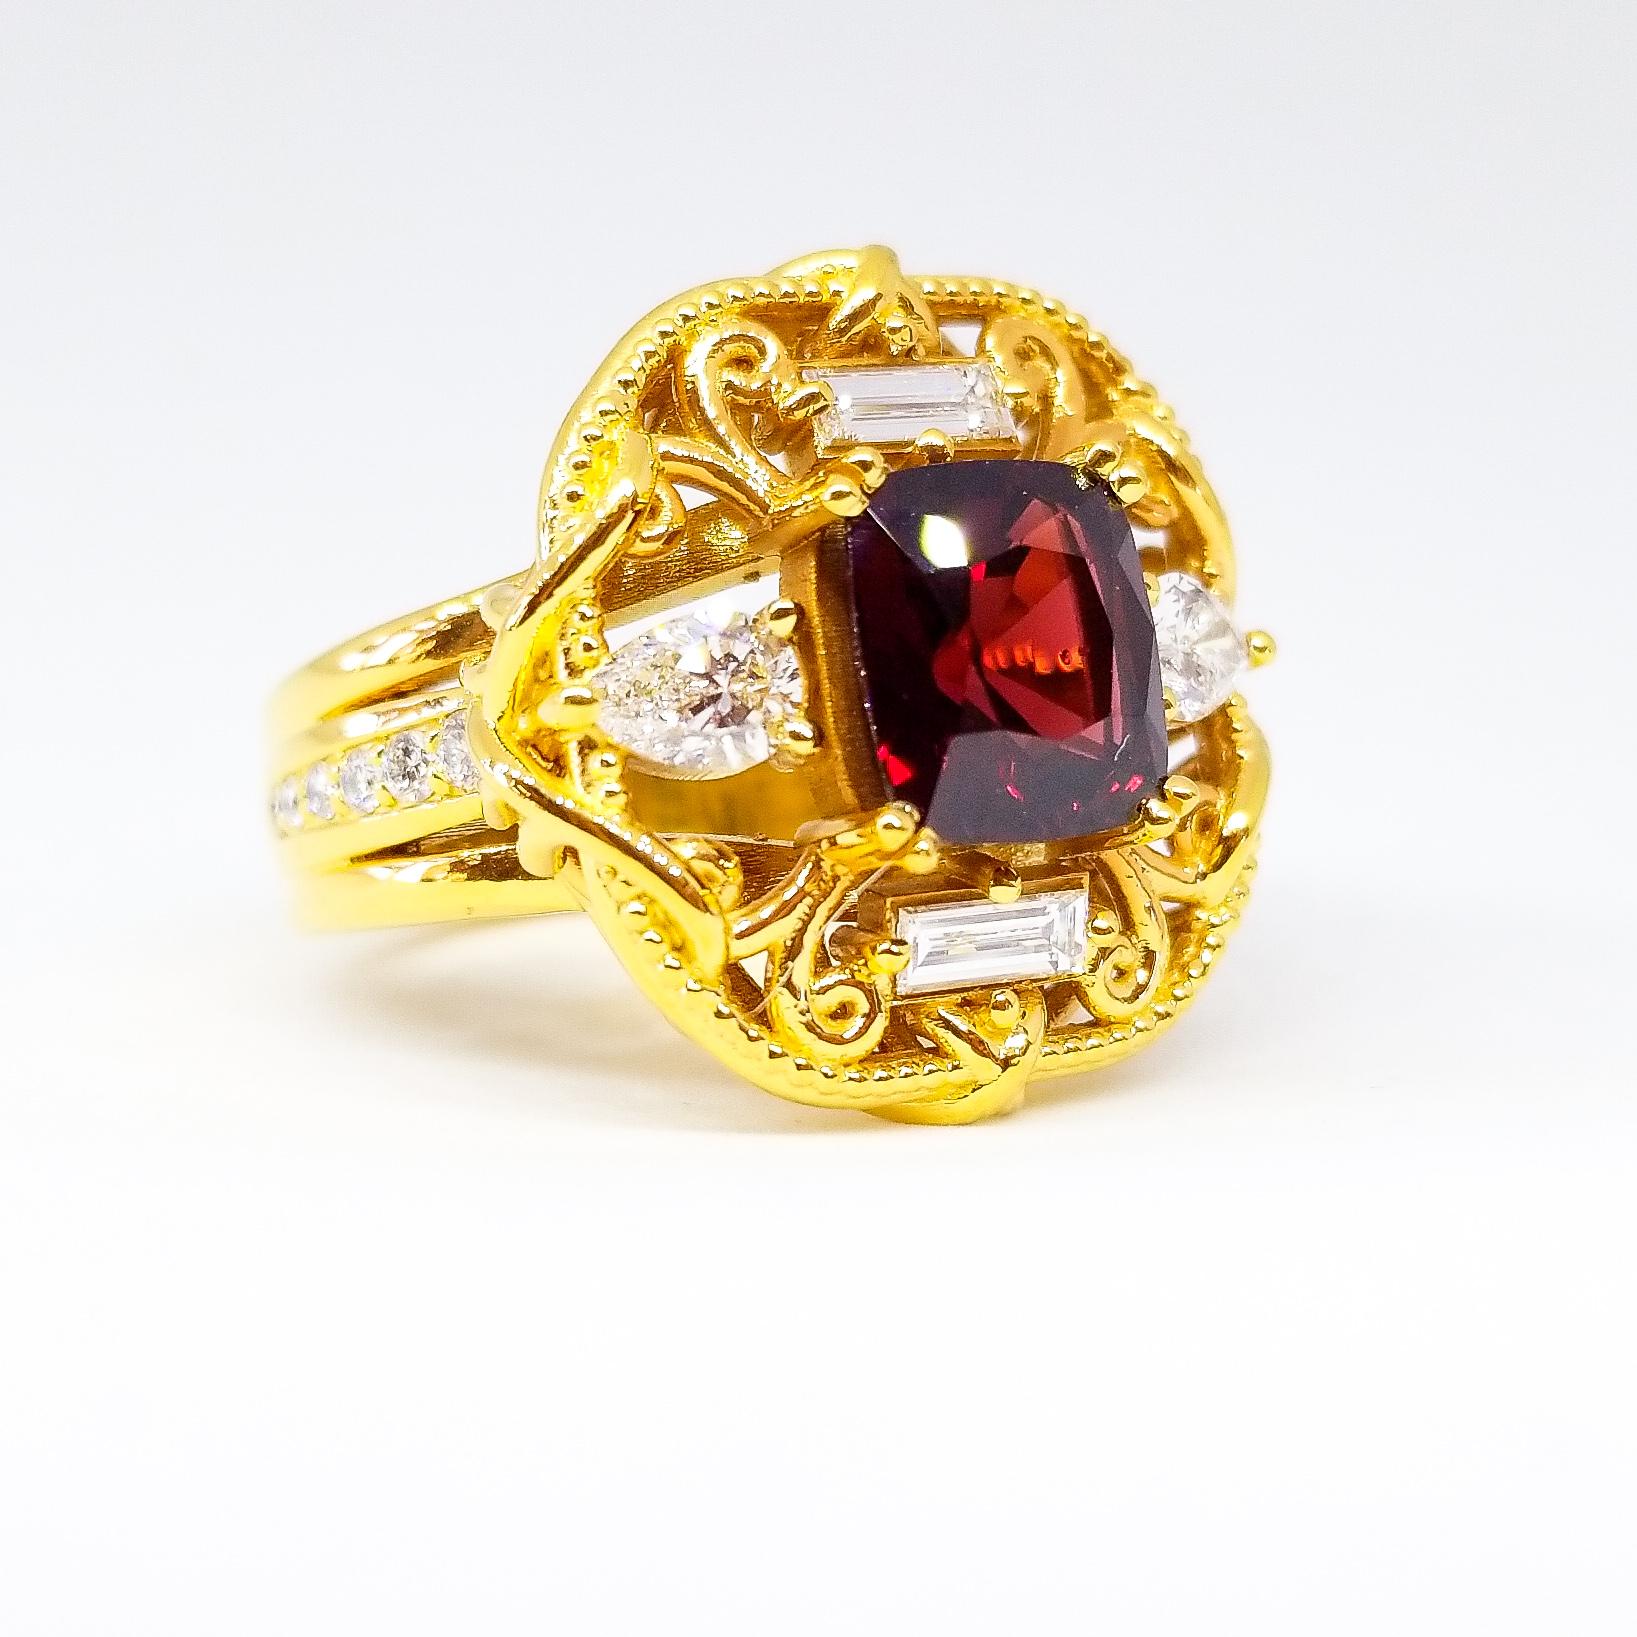 One of a Kind large Statement Ring in the Romantic style by Tom Castor. The Ring is set with a GIA Certified, 2.69 Carat, Cushion Cut, Red Spinel of deep Red hue and intensity. The AAA quality gem is set in a one of a kind, custom designed ring